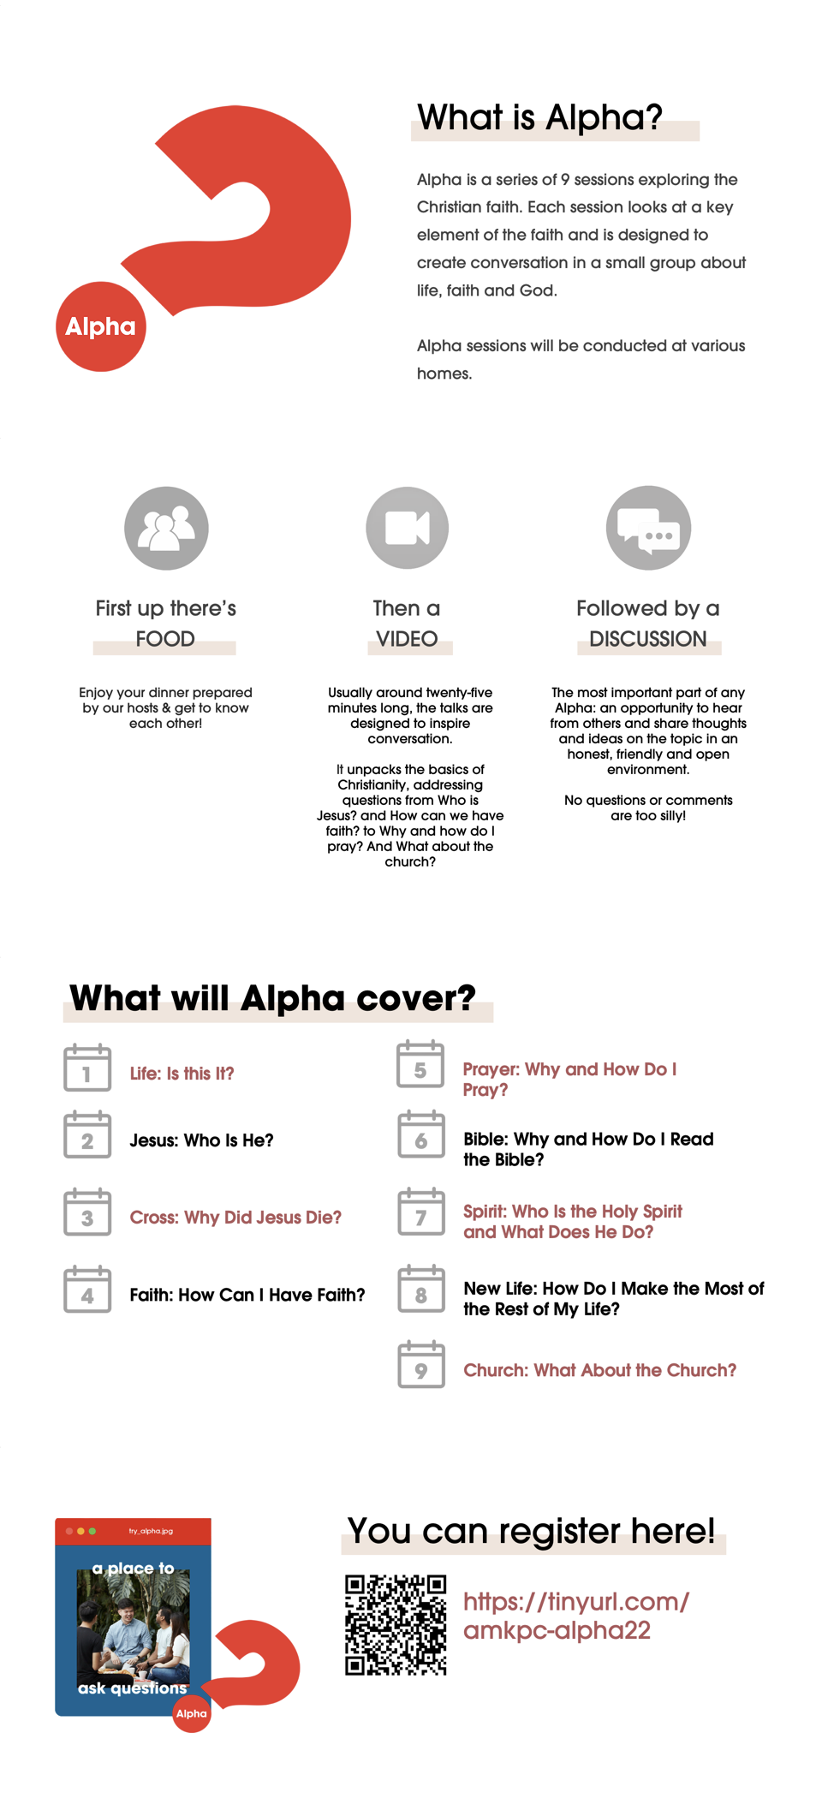 Find out more about Alpha - Website (2)